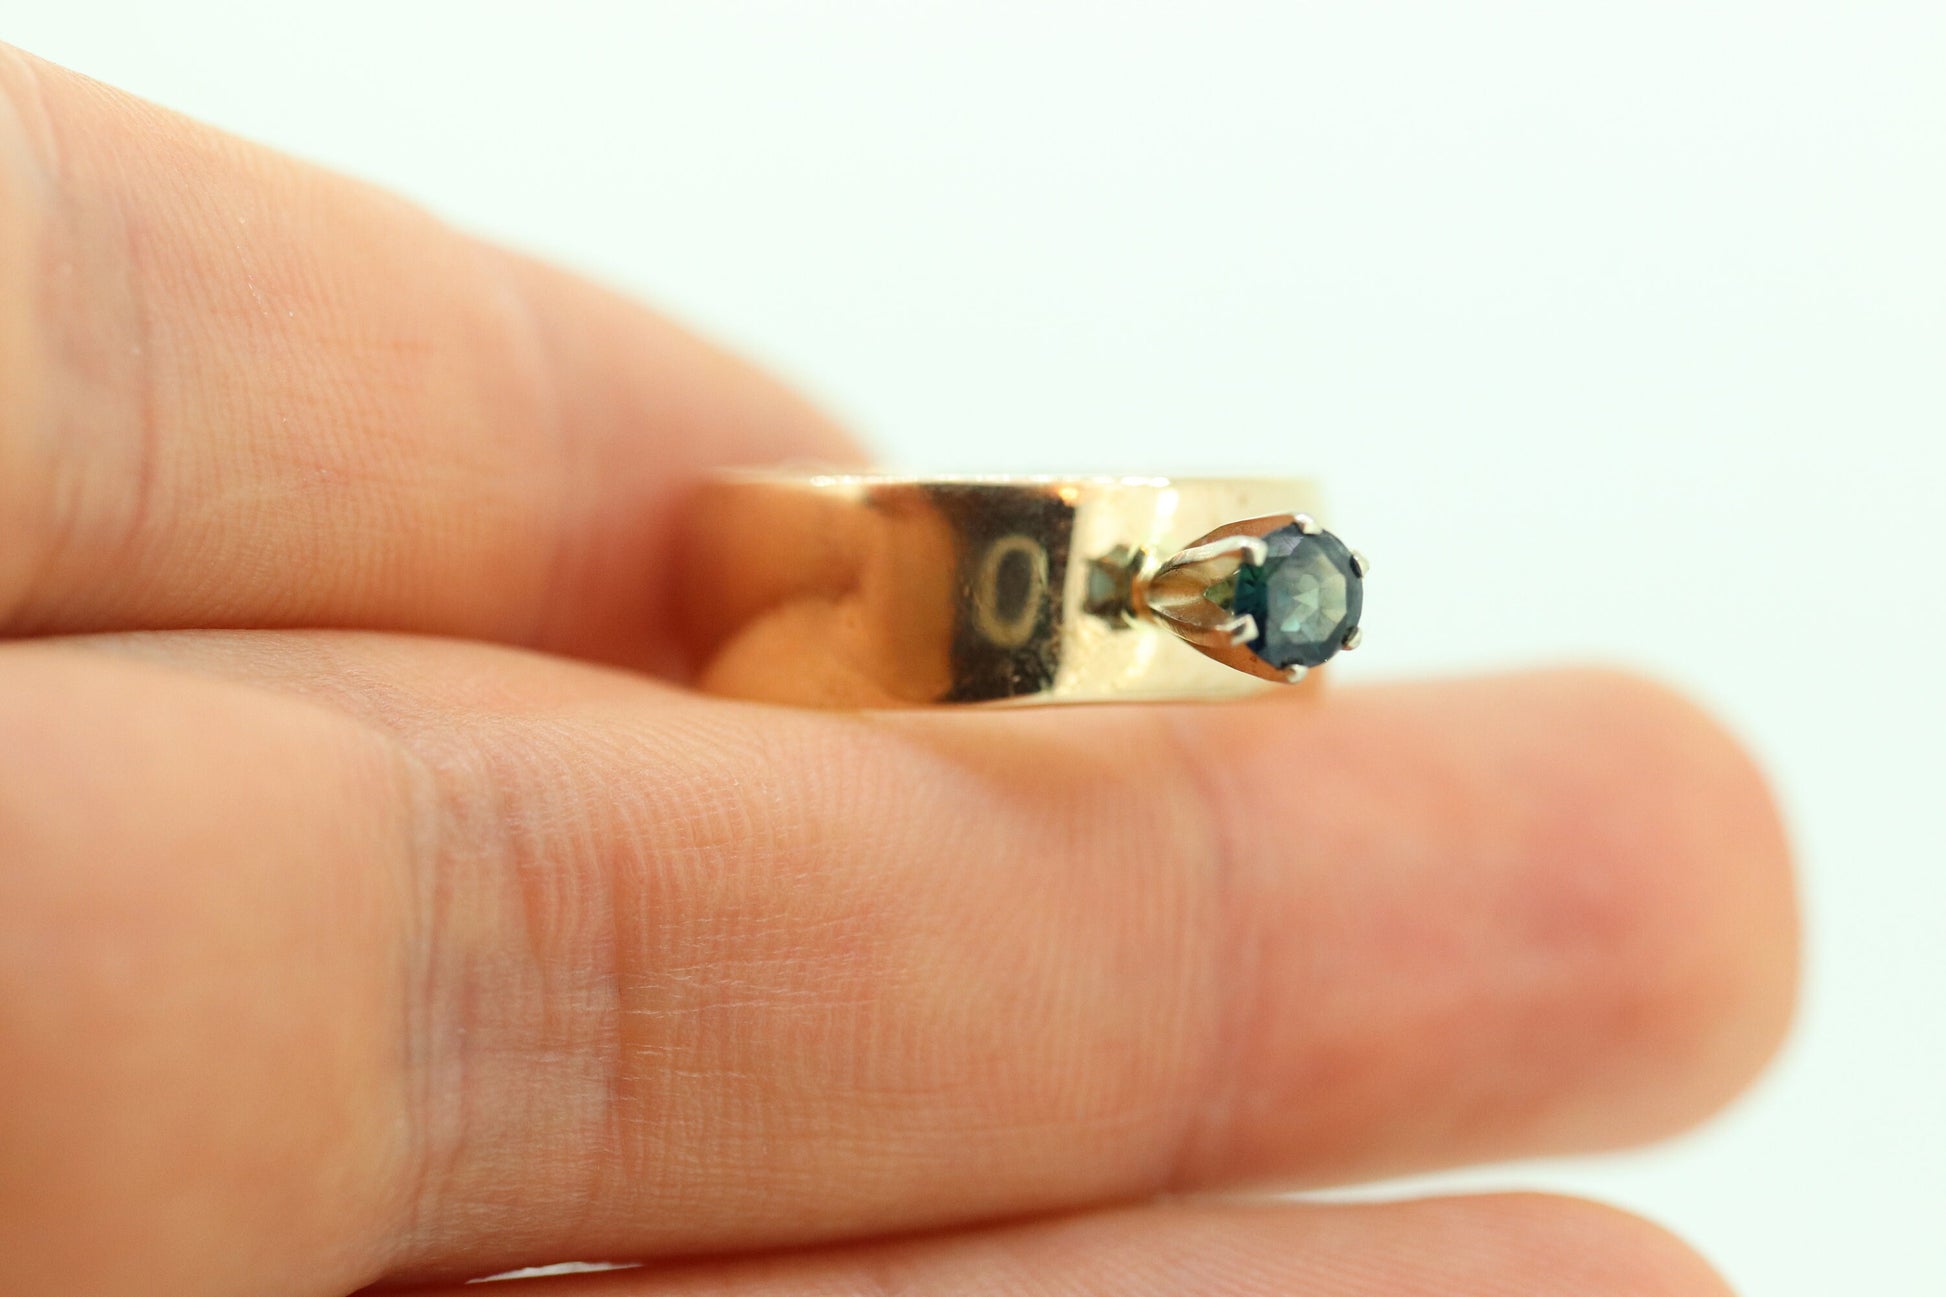 10k Blue Sapphire solitaire high setting ring. 10k Victorian Wide band Prong set Sapphire wide cigar band. st(130)